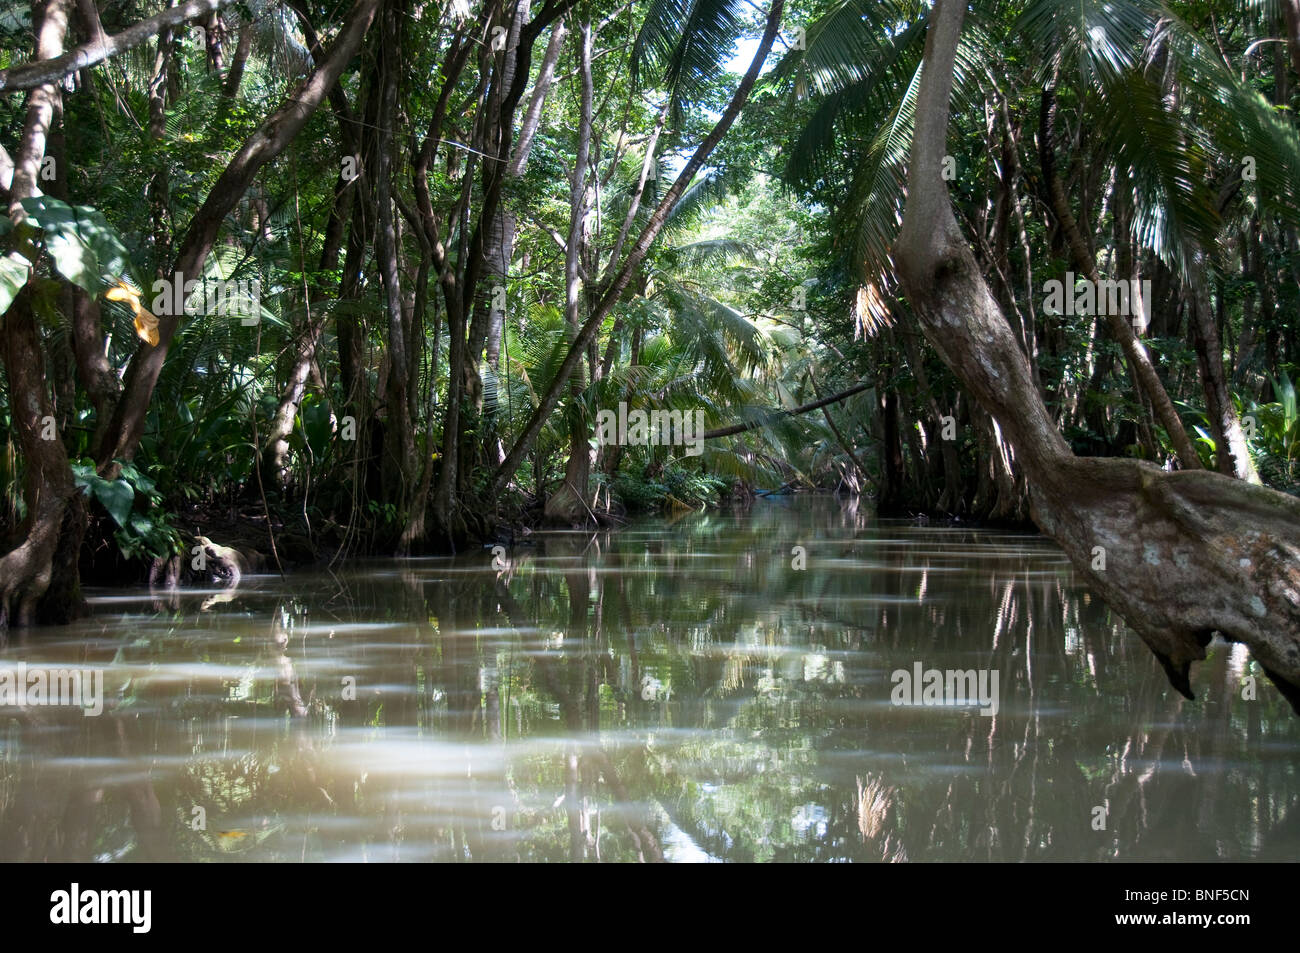 River flowing through a forest, Indian River, Portsmouth, Dominica Stock Photo